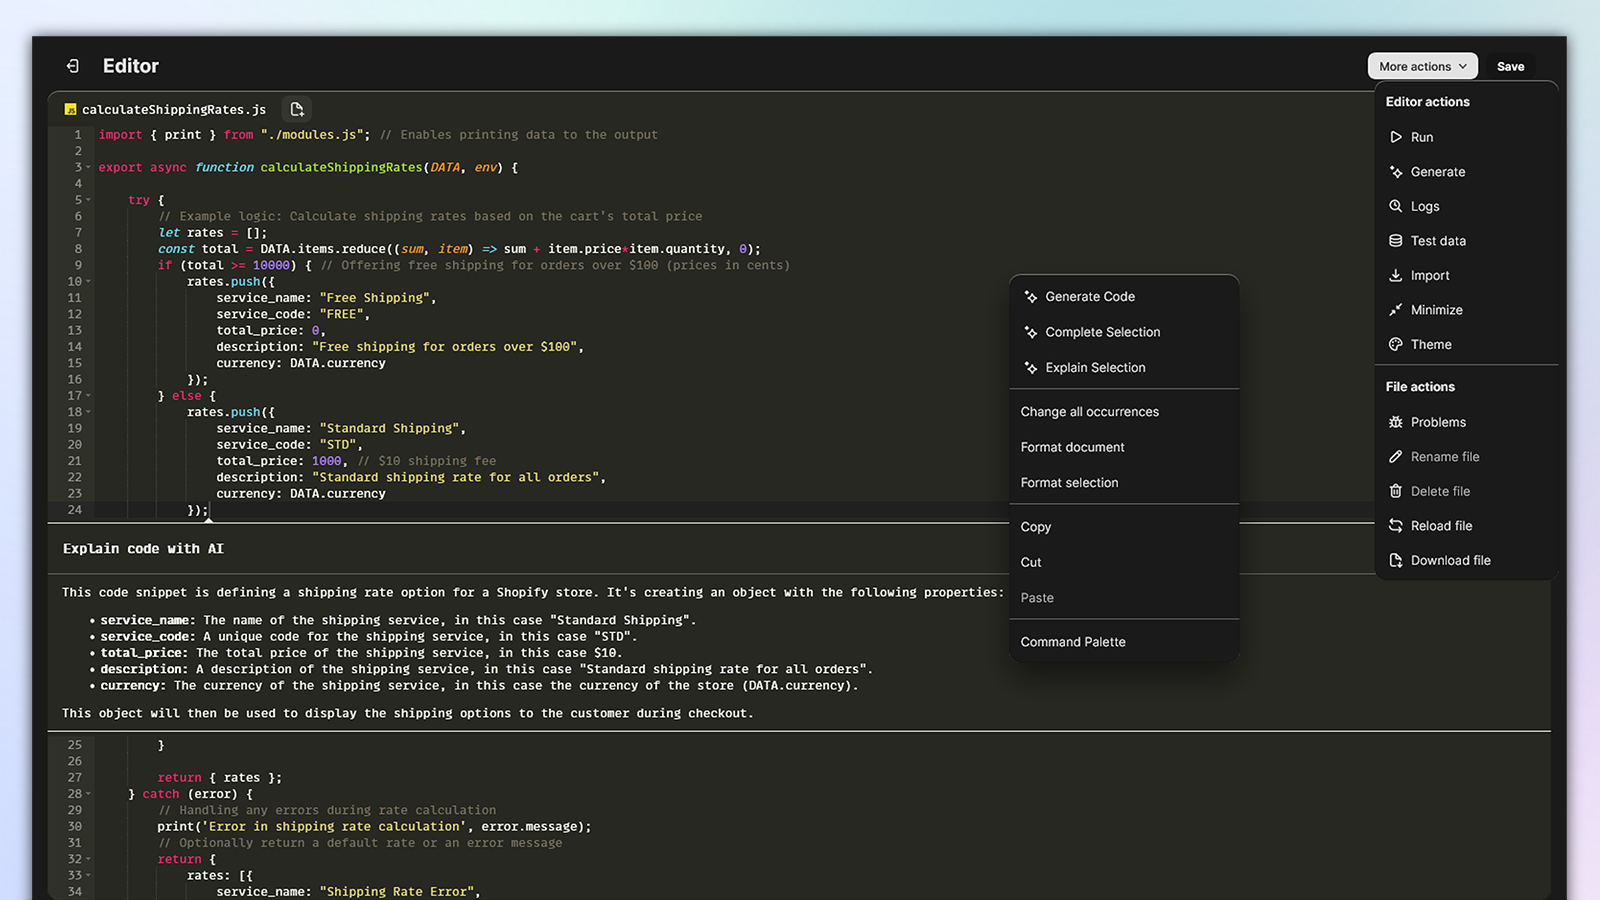 JsRates app editor page in dark theme